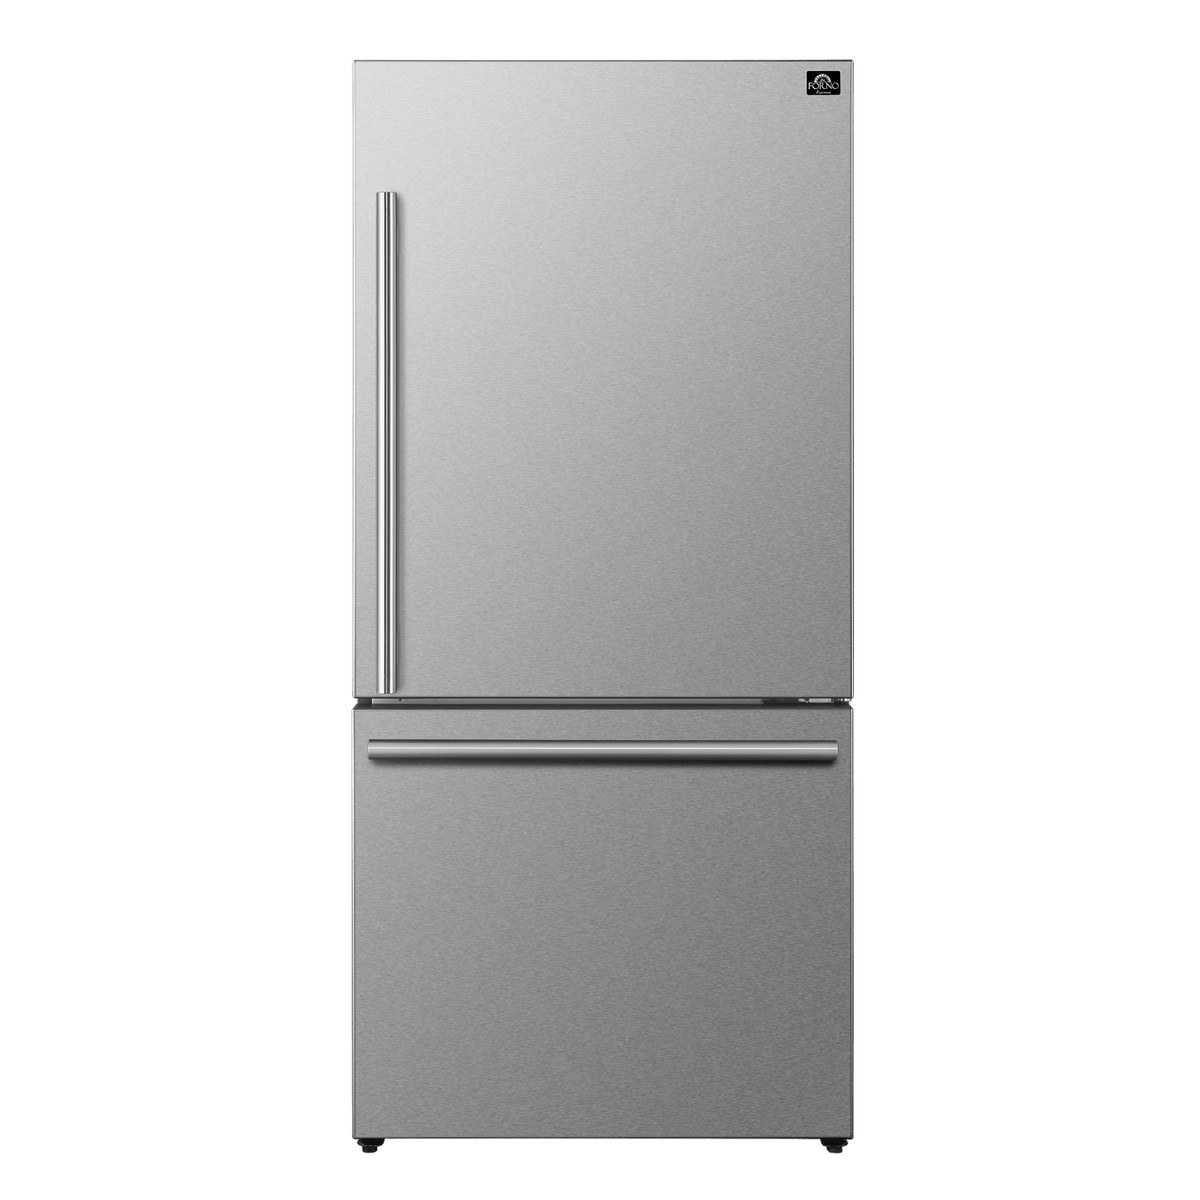 FORNO 31″ Milano Espresso Bottom Freezer Right Swing Door Refrigerator in Stainless Steel, 17.2 cu. ft. Additionnal Antique Brass Handles Included